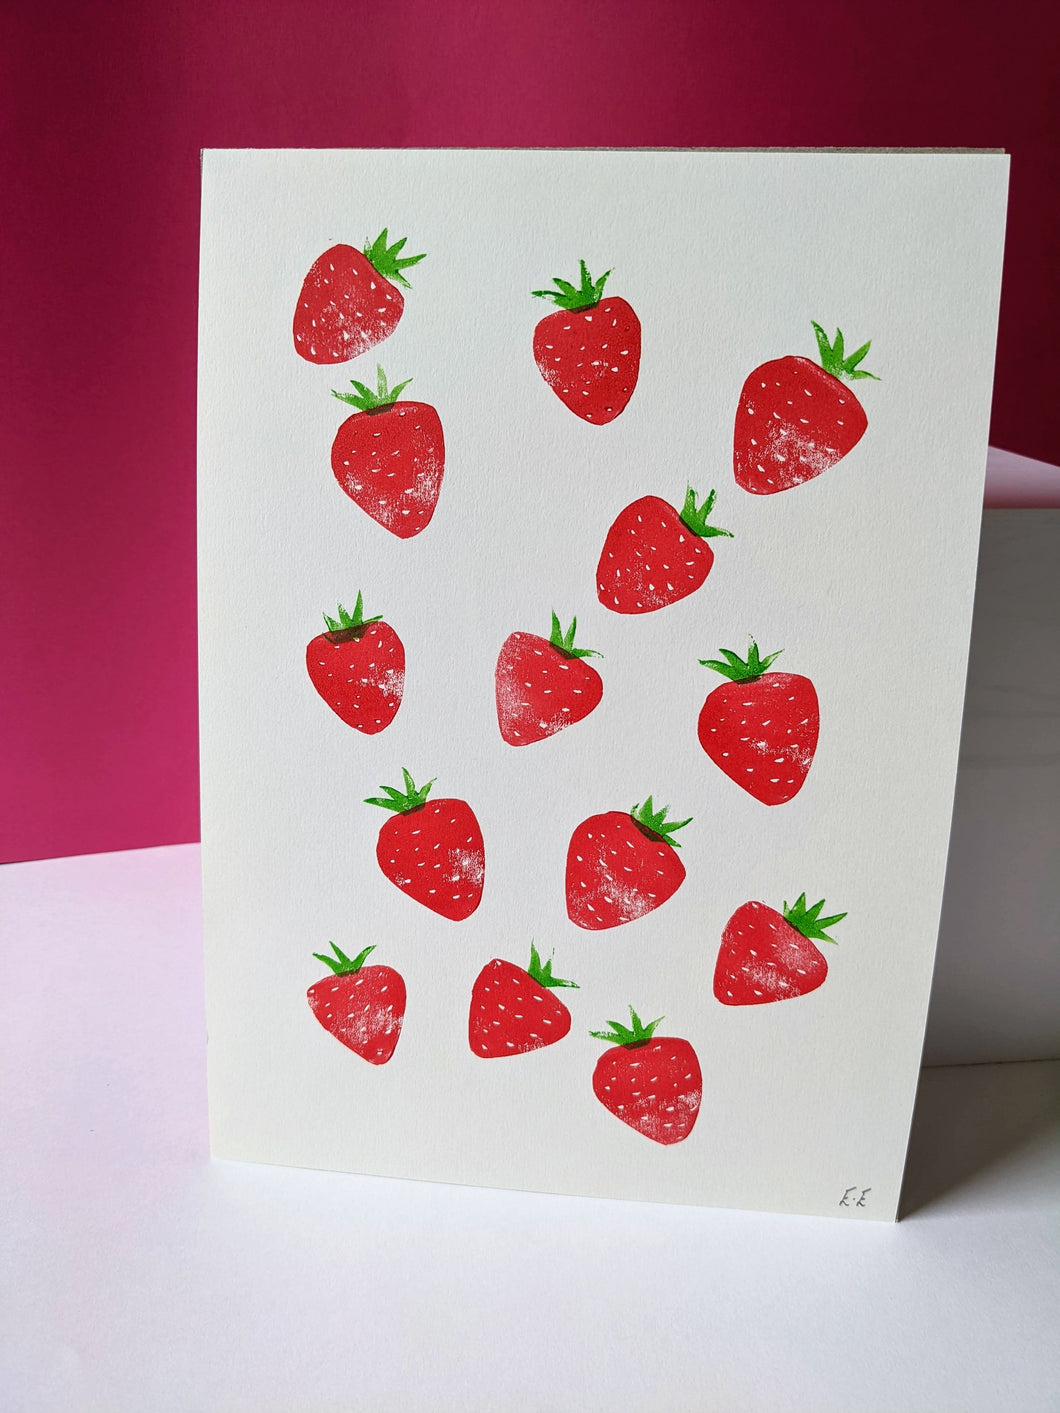 A white print with red strawberries printed on it